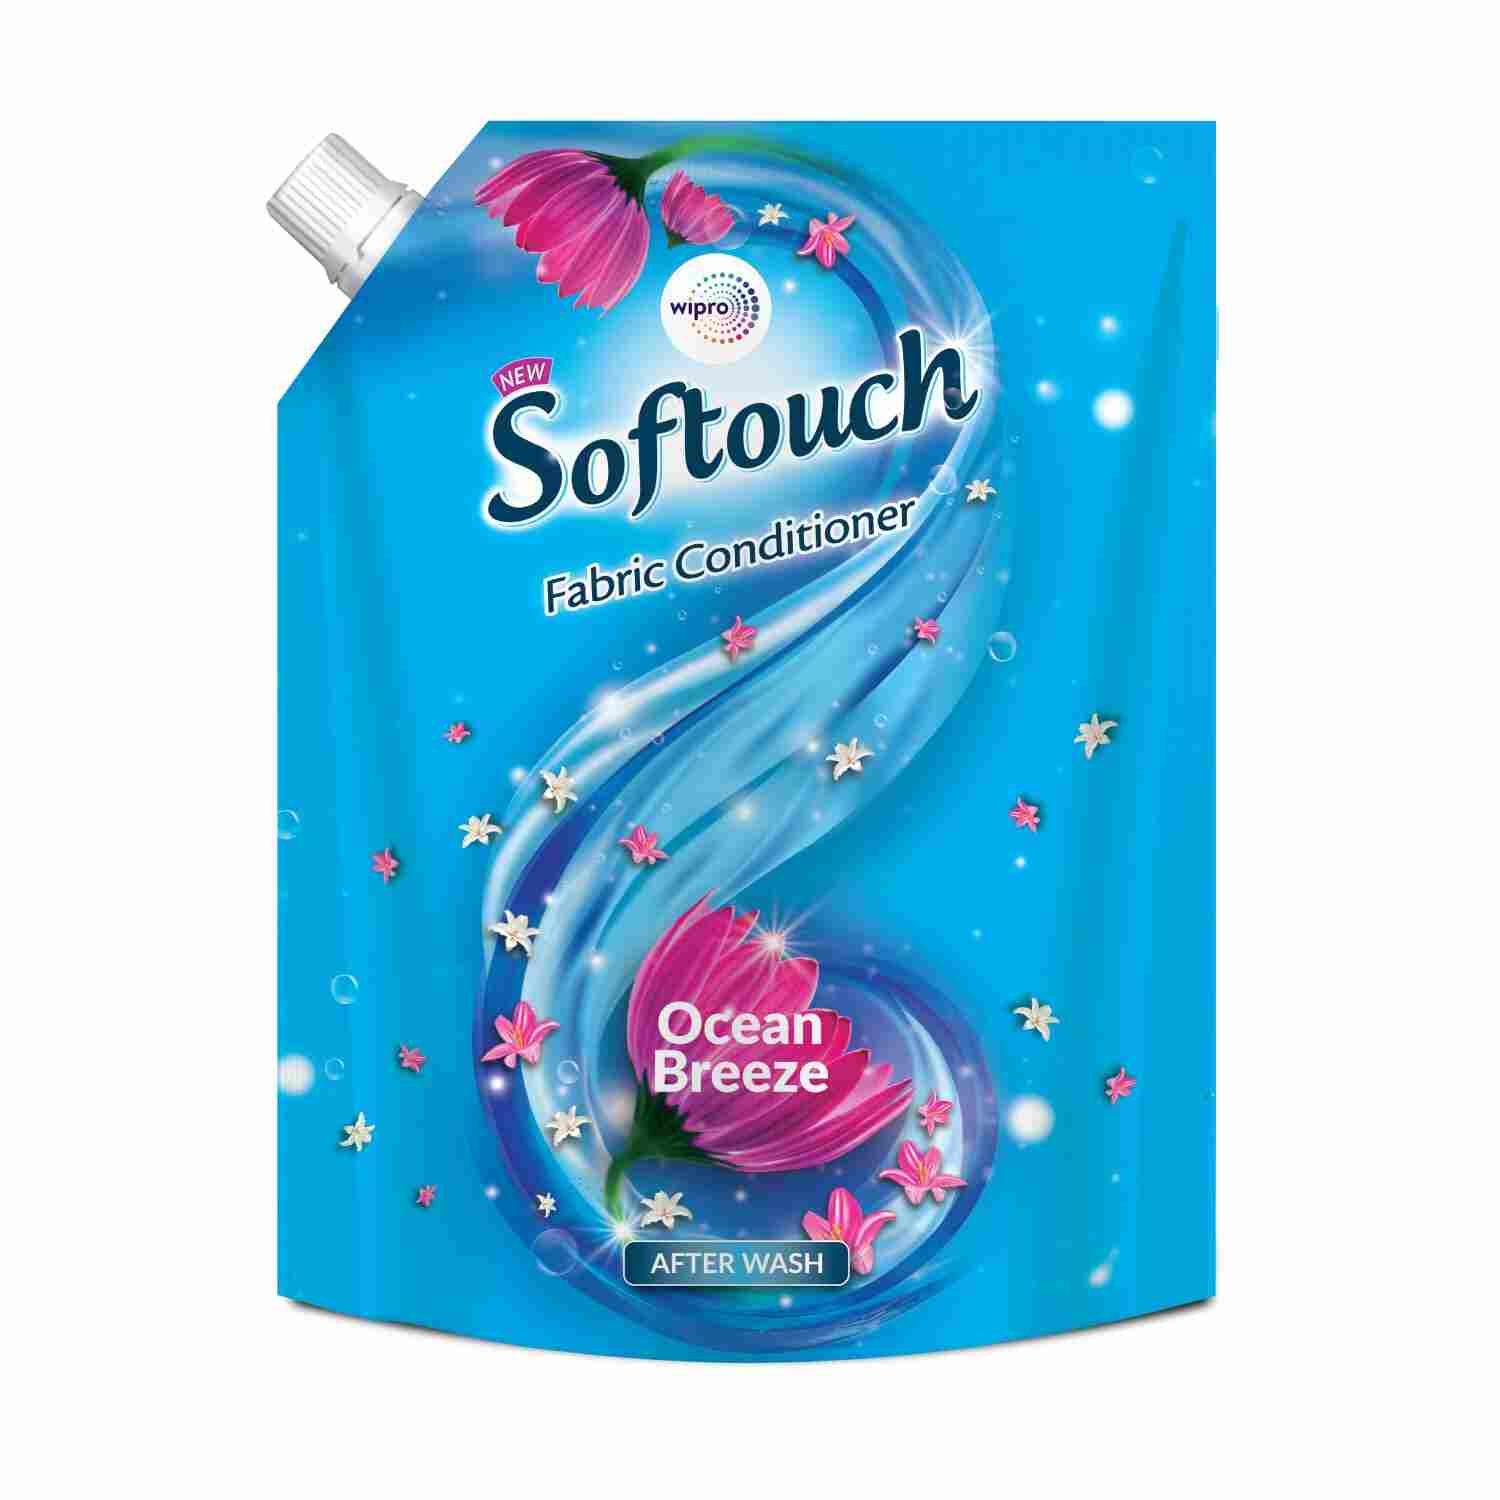 Softouch Ocean Breeze 120ml Fabric Conditioner [Pack of 01]